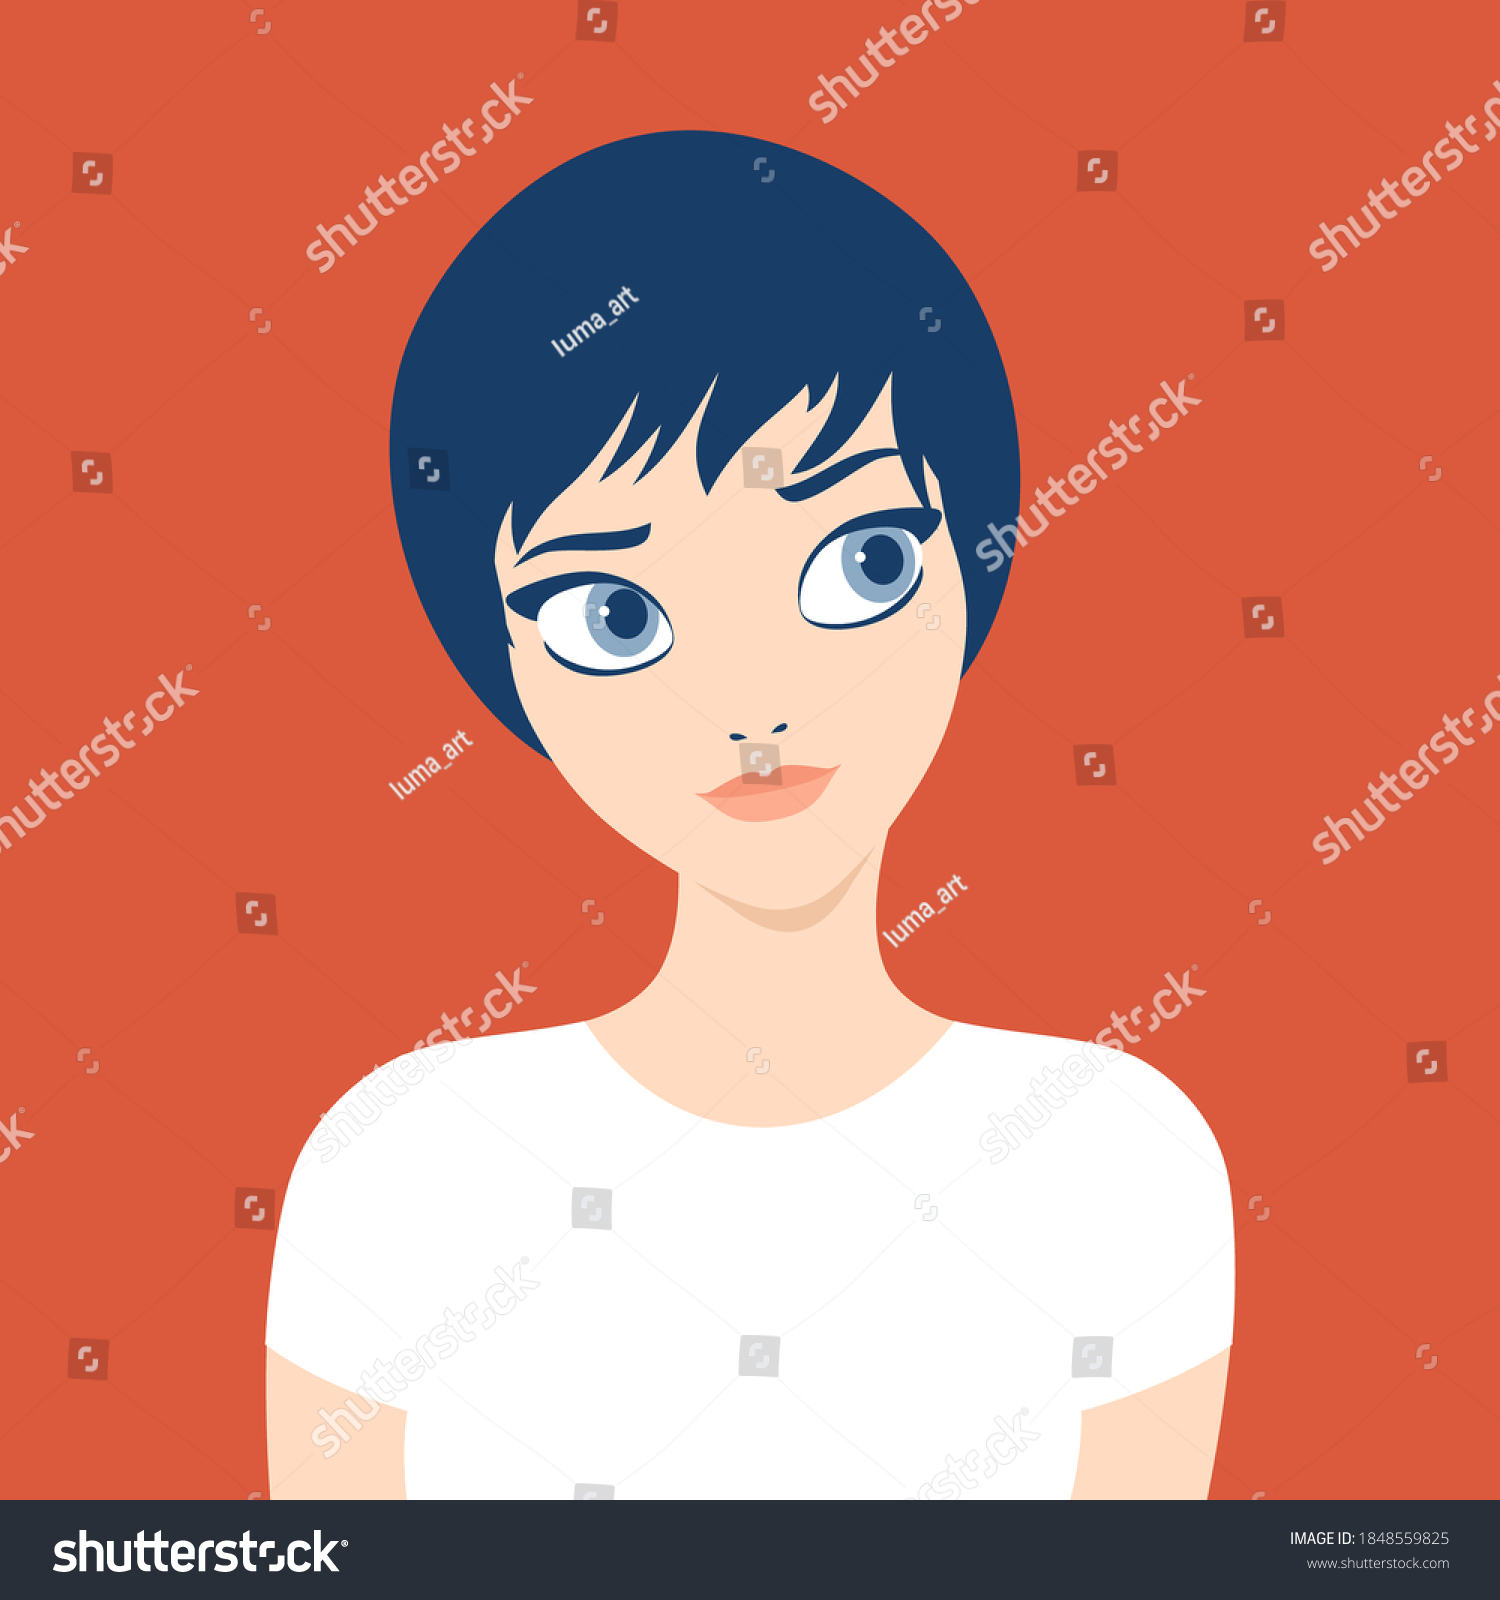 465 Tomboy Girl Stock Illustrations Images And Vectors Shutterstock 3564